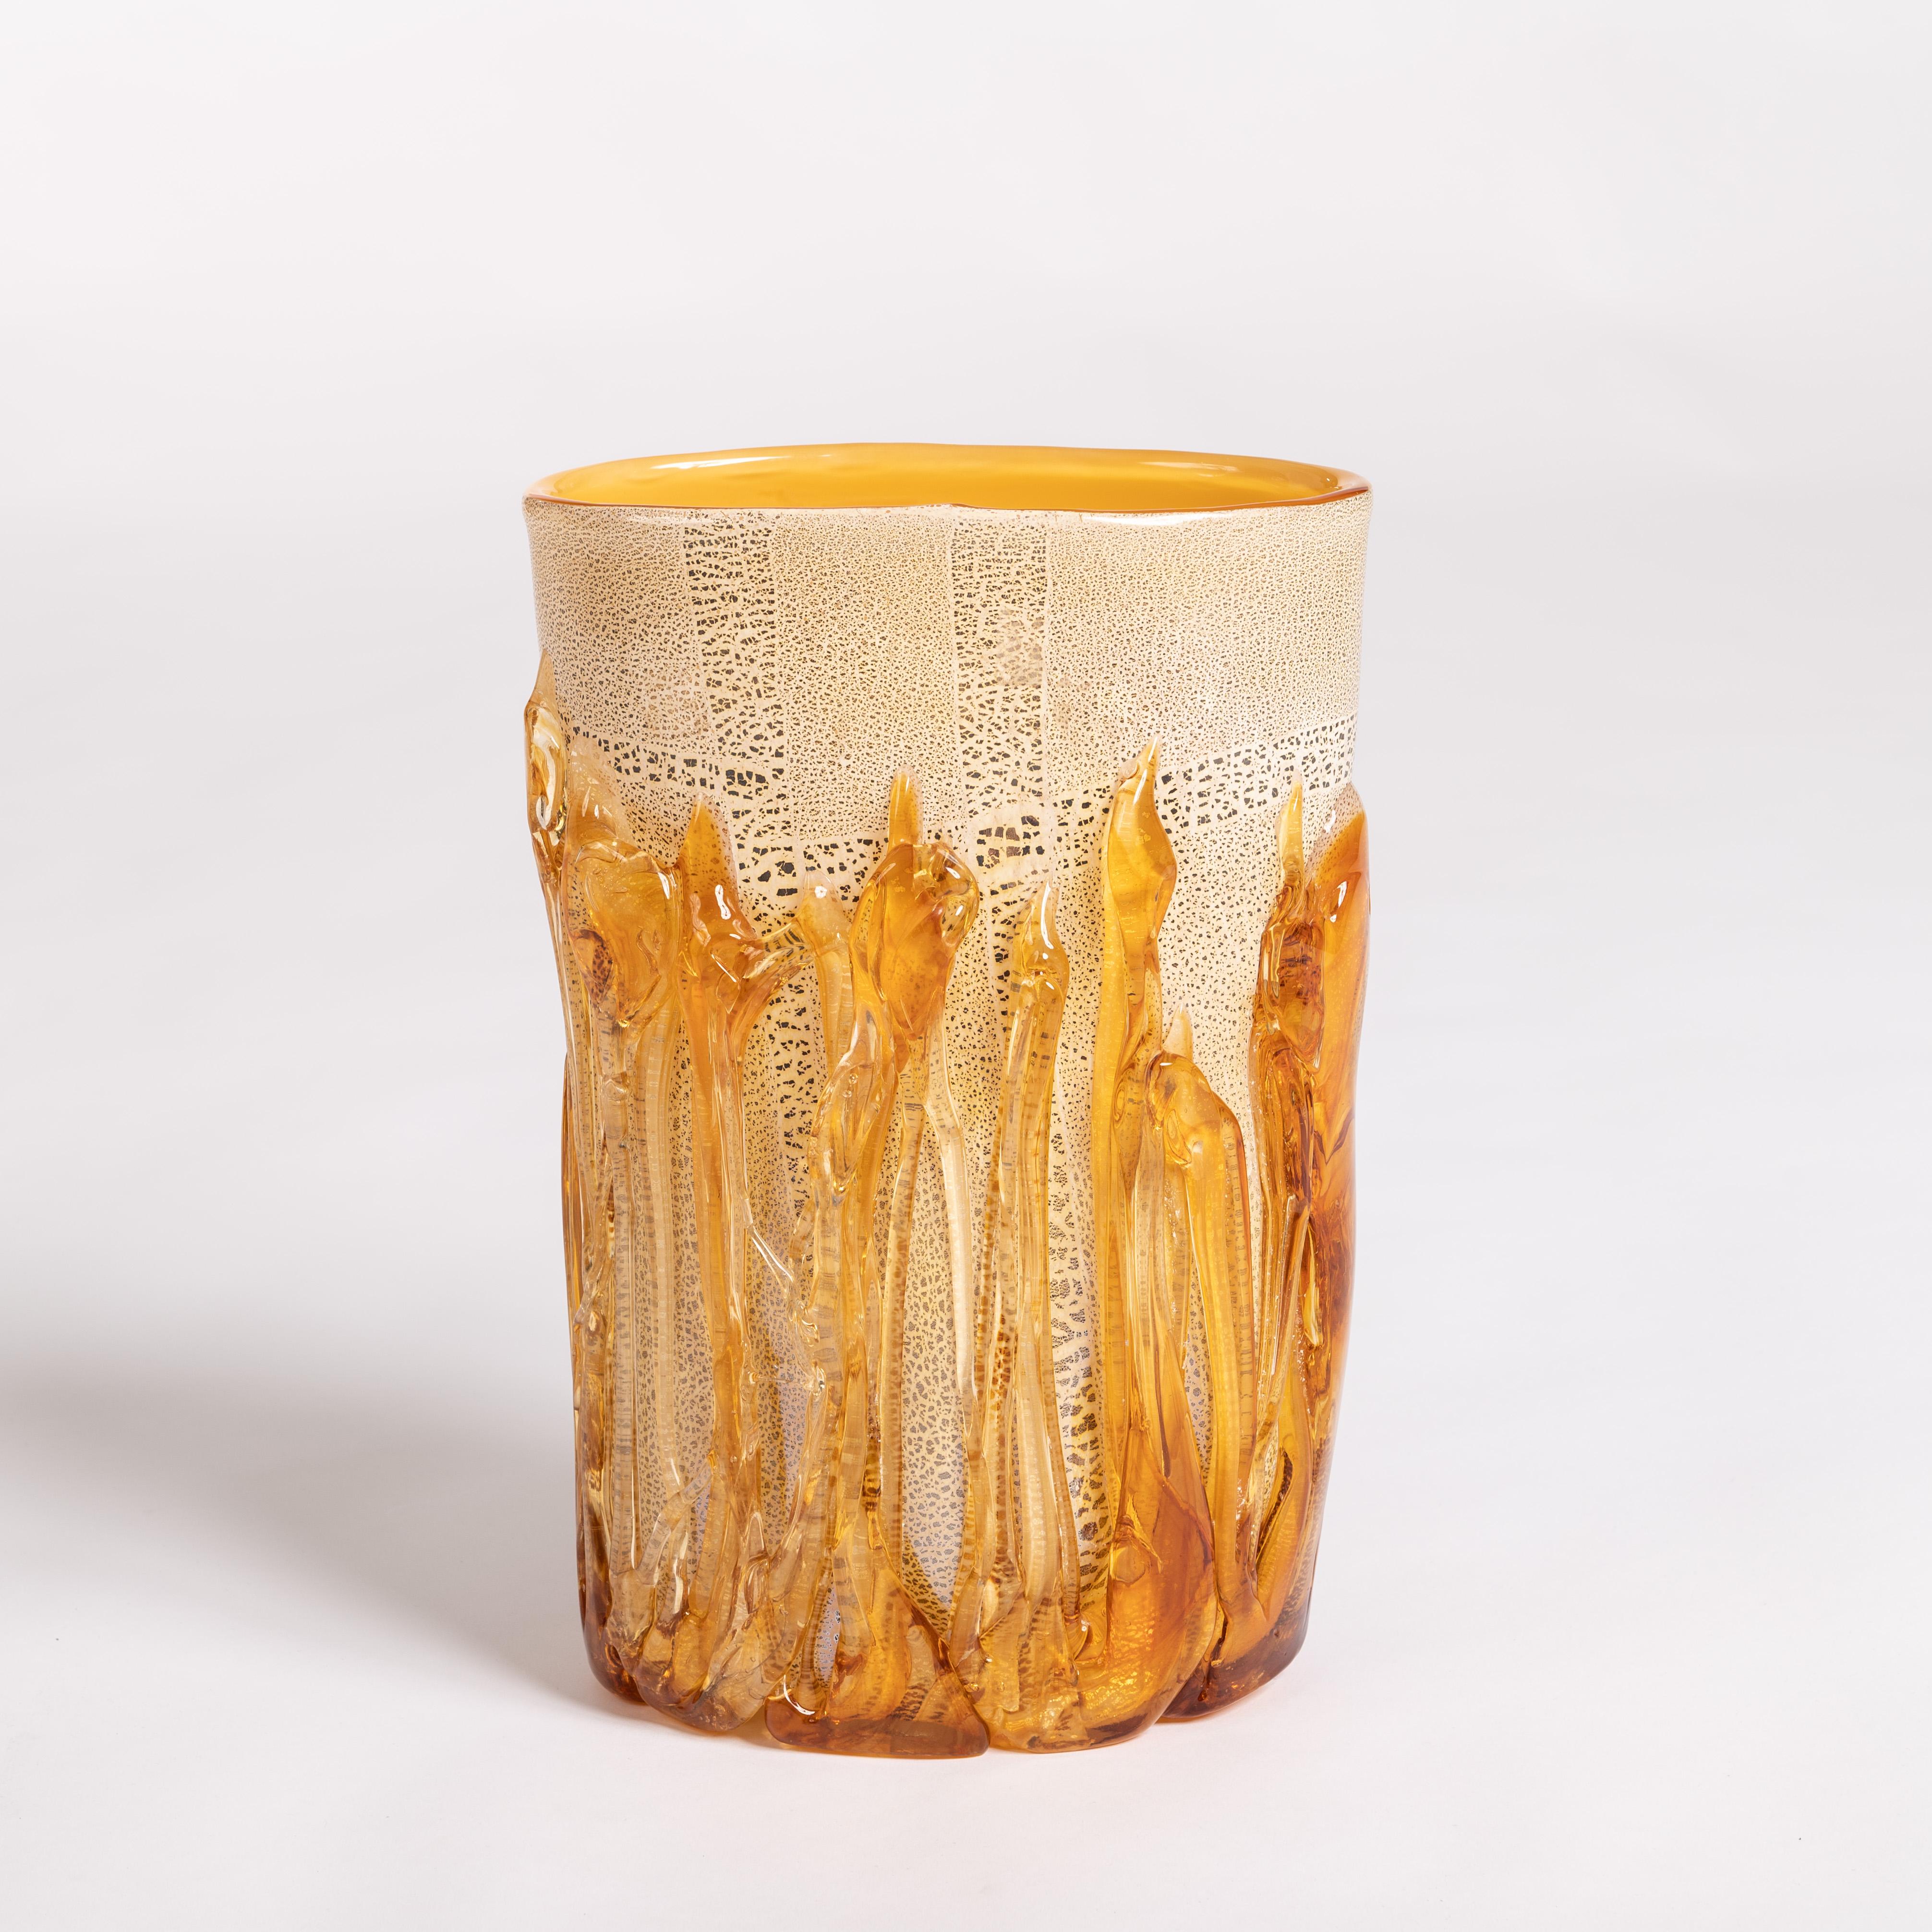 Modern Murano Glass Vase in Gold-Amber Color signed by Hand, Italy 2015 For Sale 3